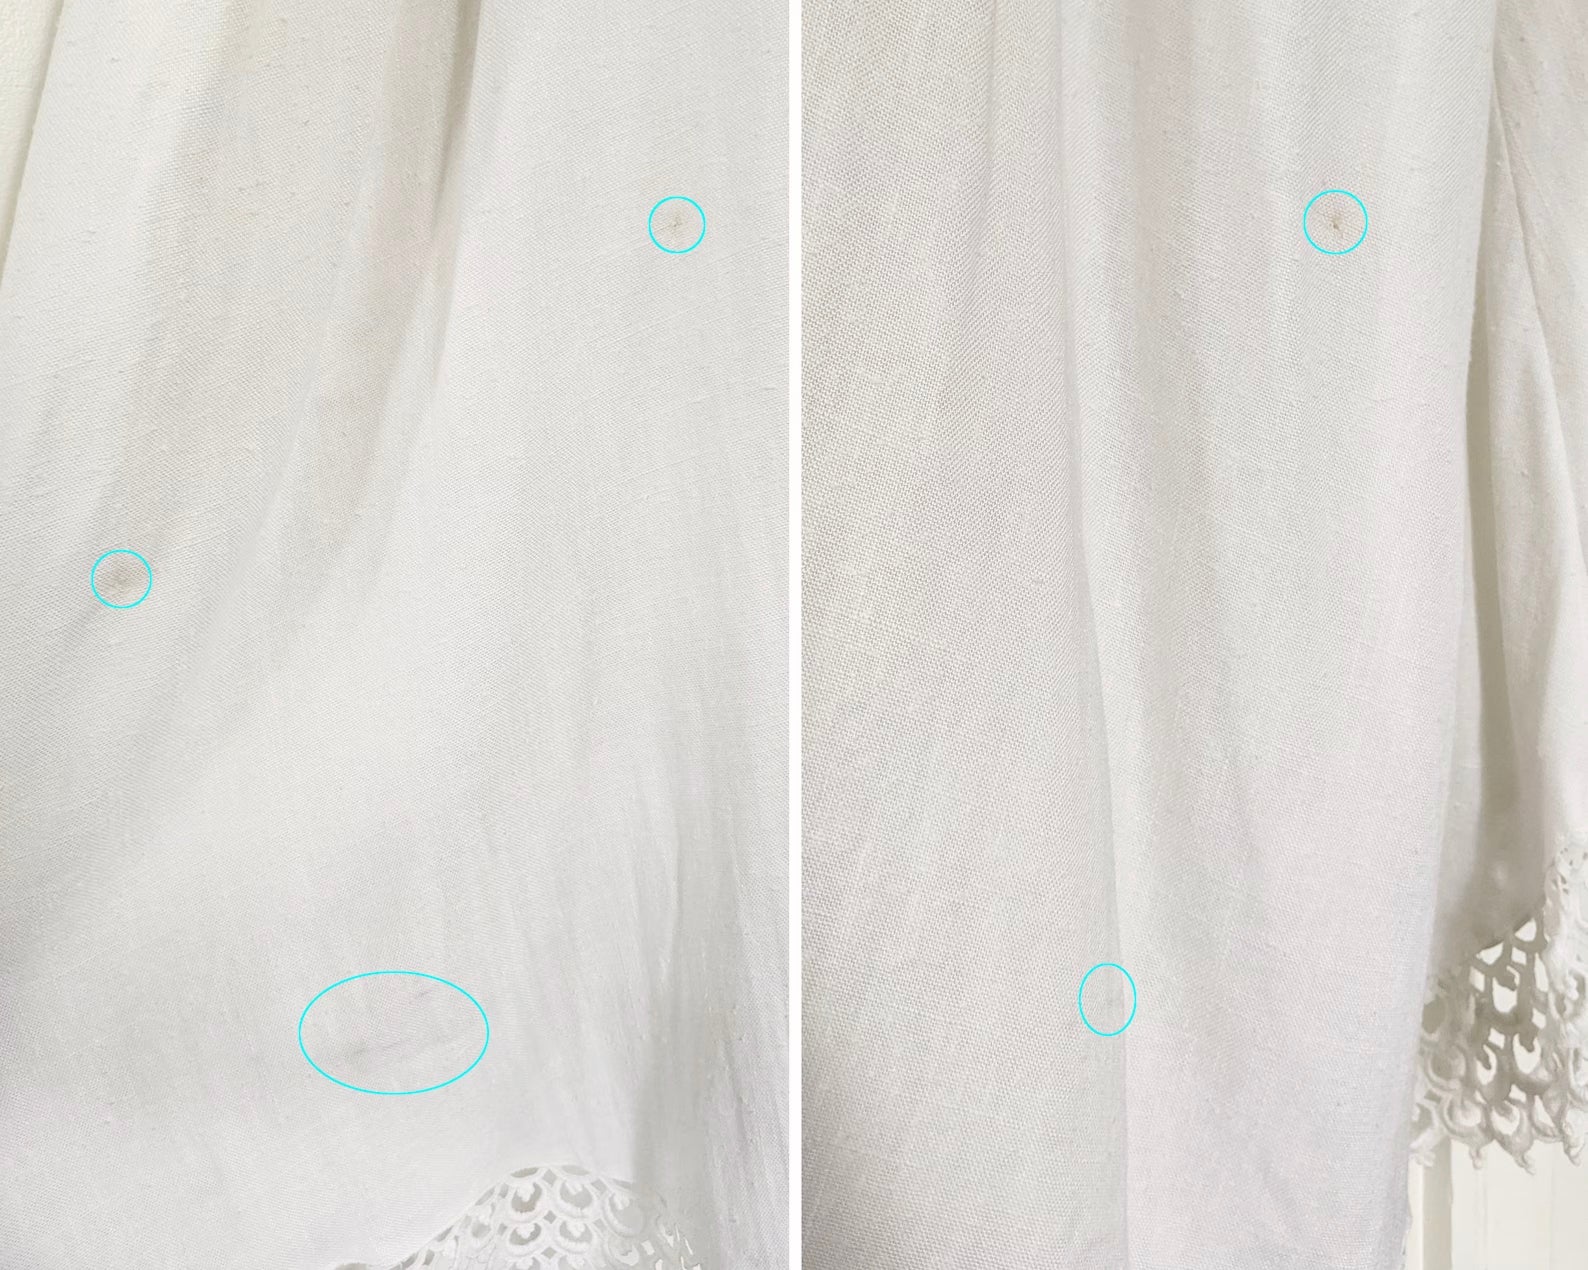 close up of small marks on back of dress